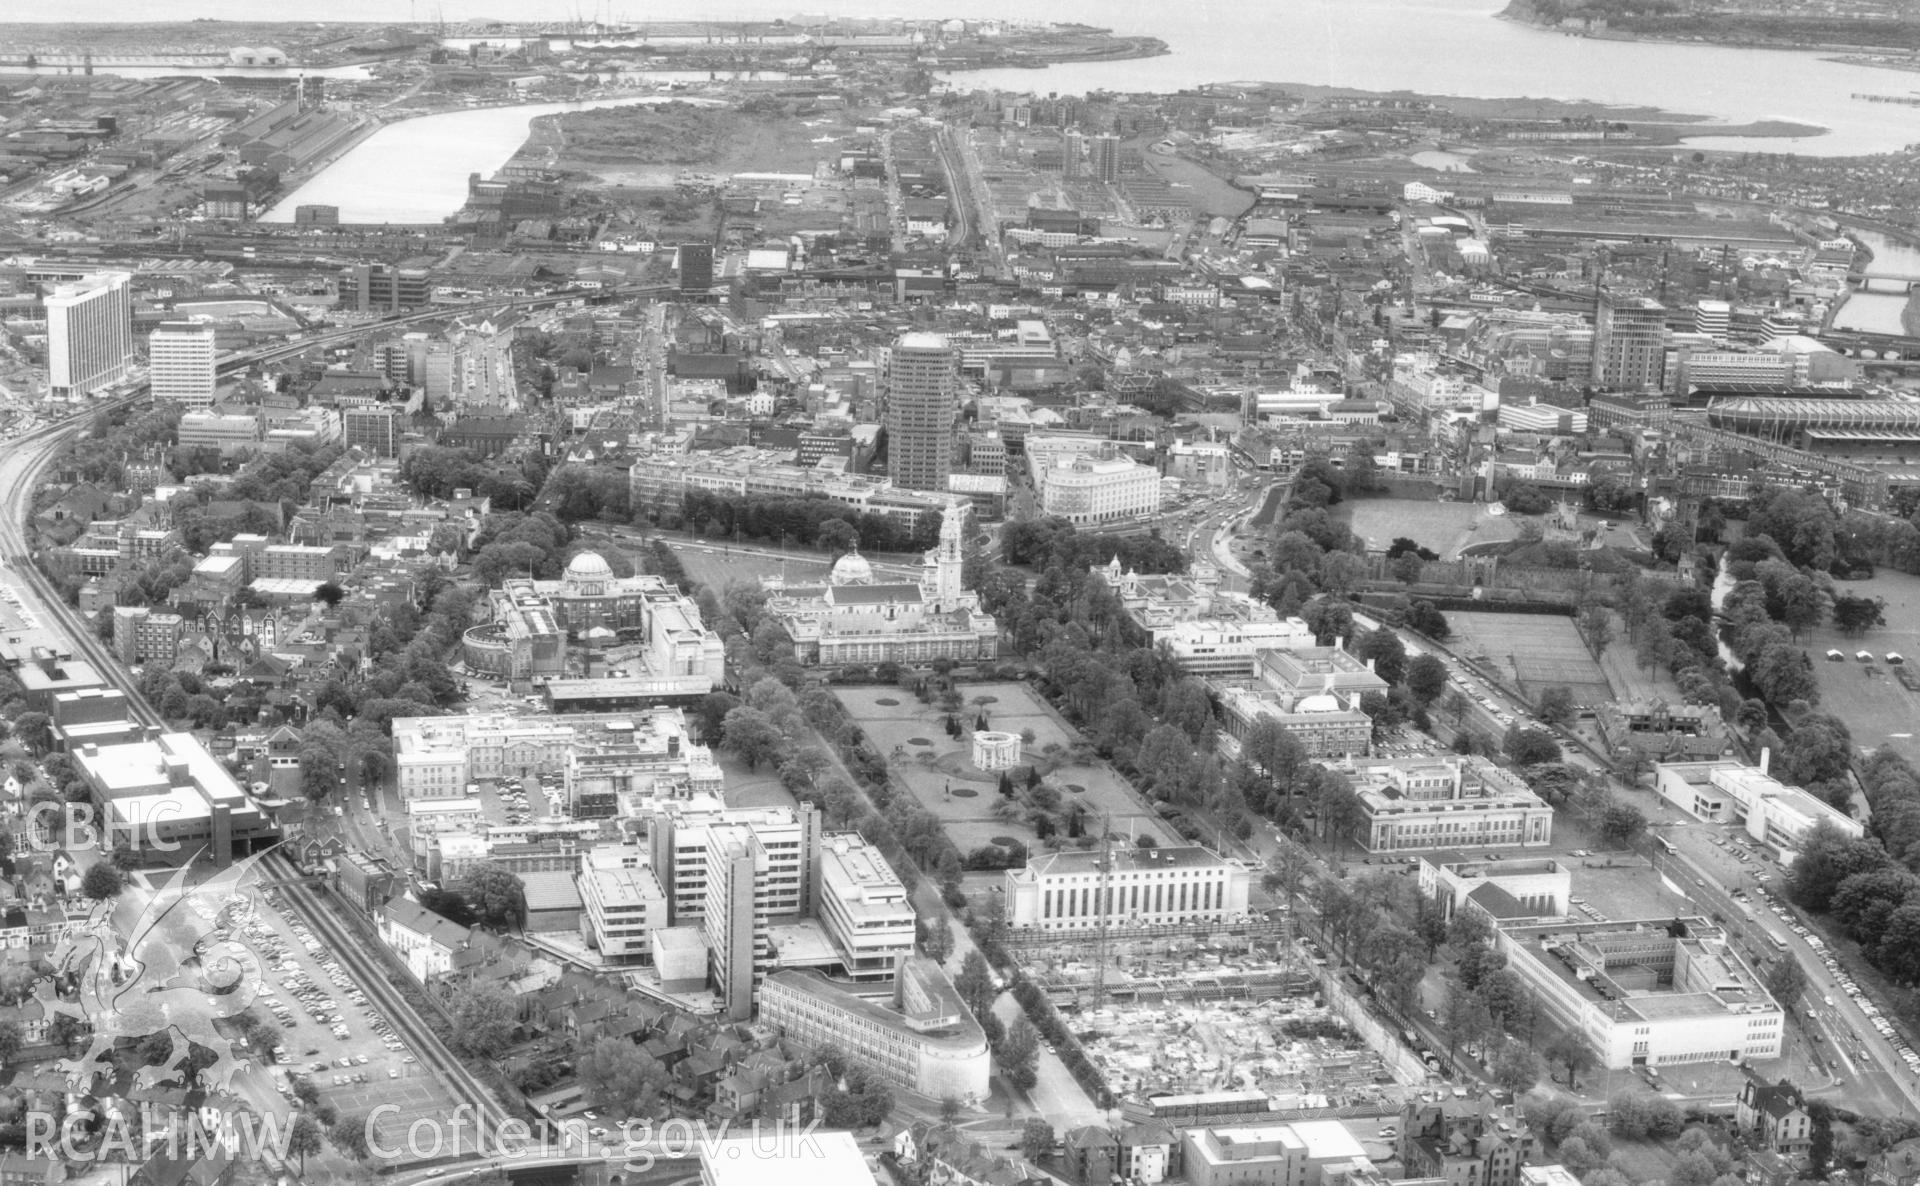 1 b/w print showing aerial view of Cathays Civic Centre, Cardiff, showing the Assembly Building under construction; collated by the former Central Office of Information.